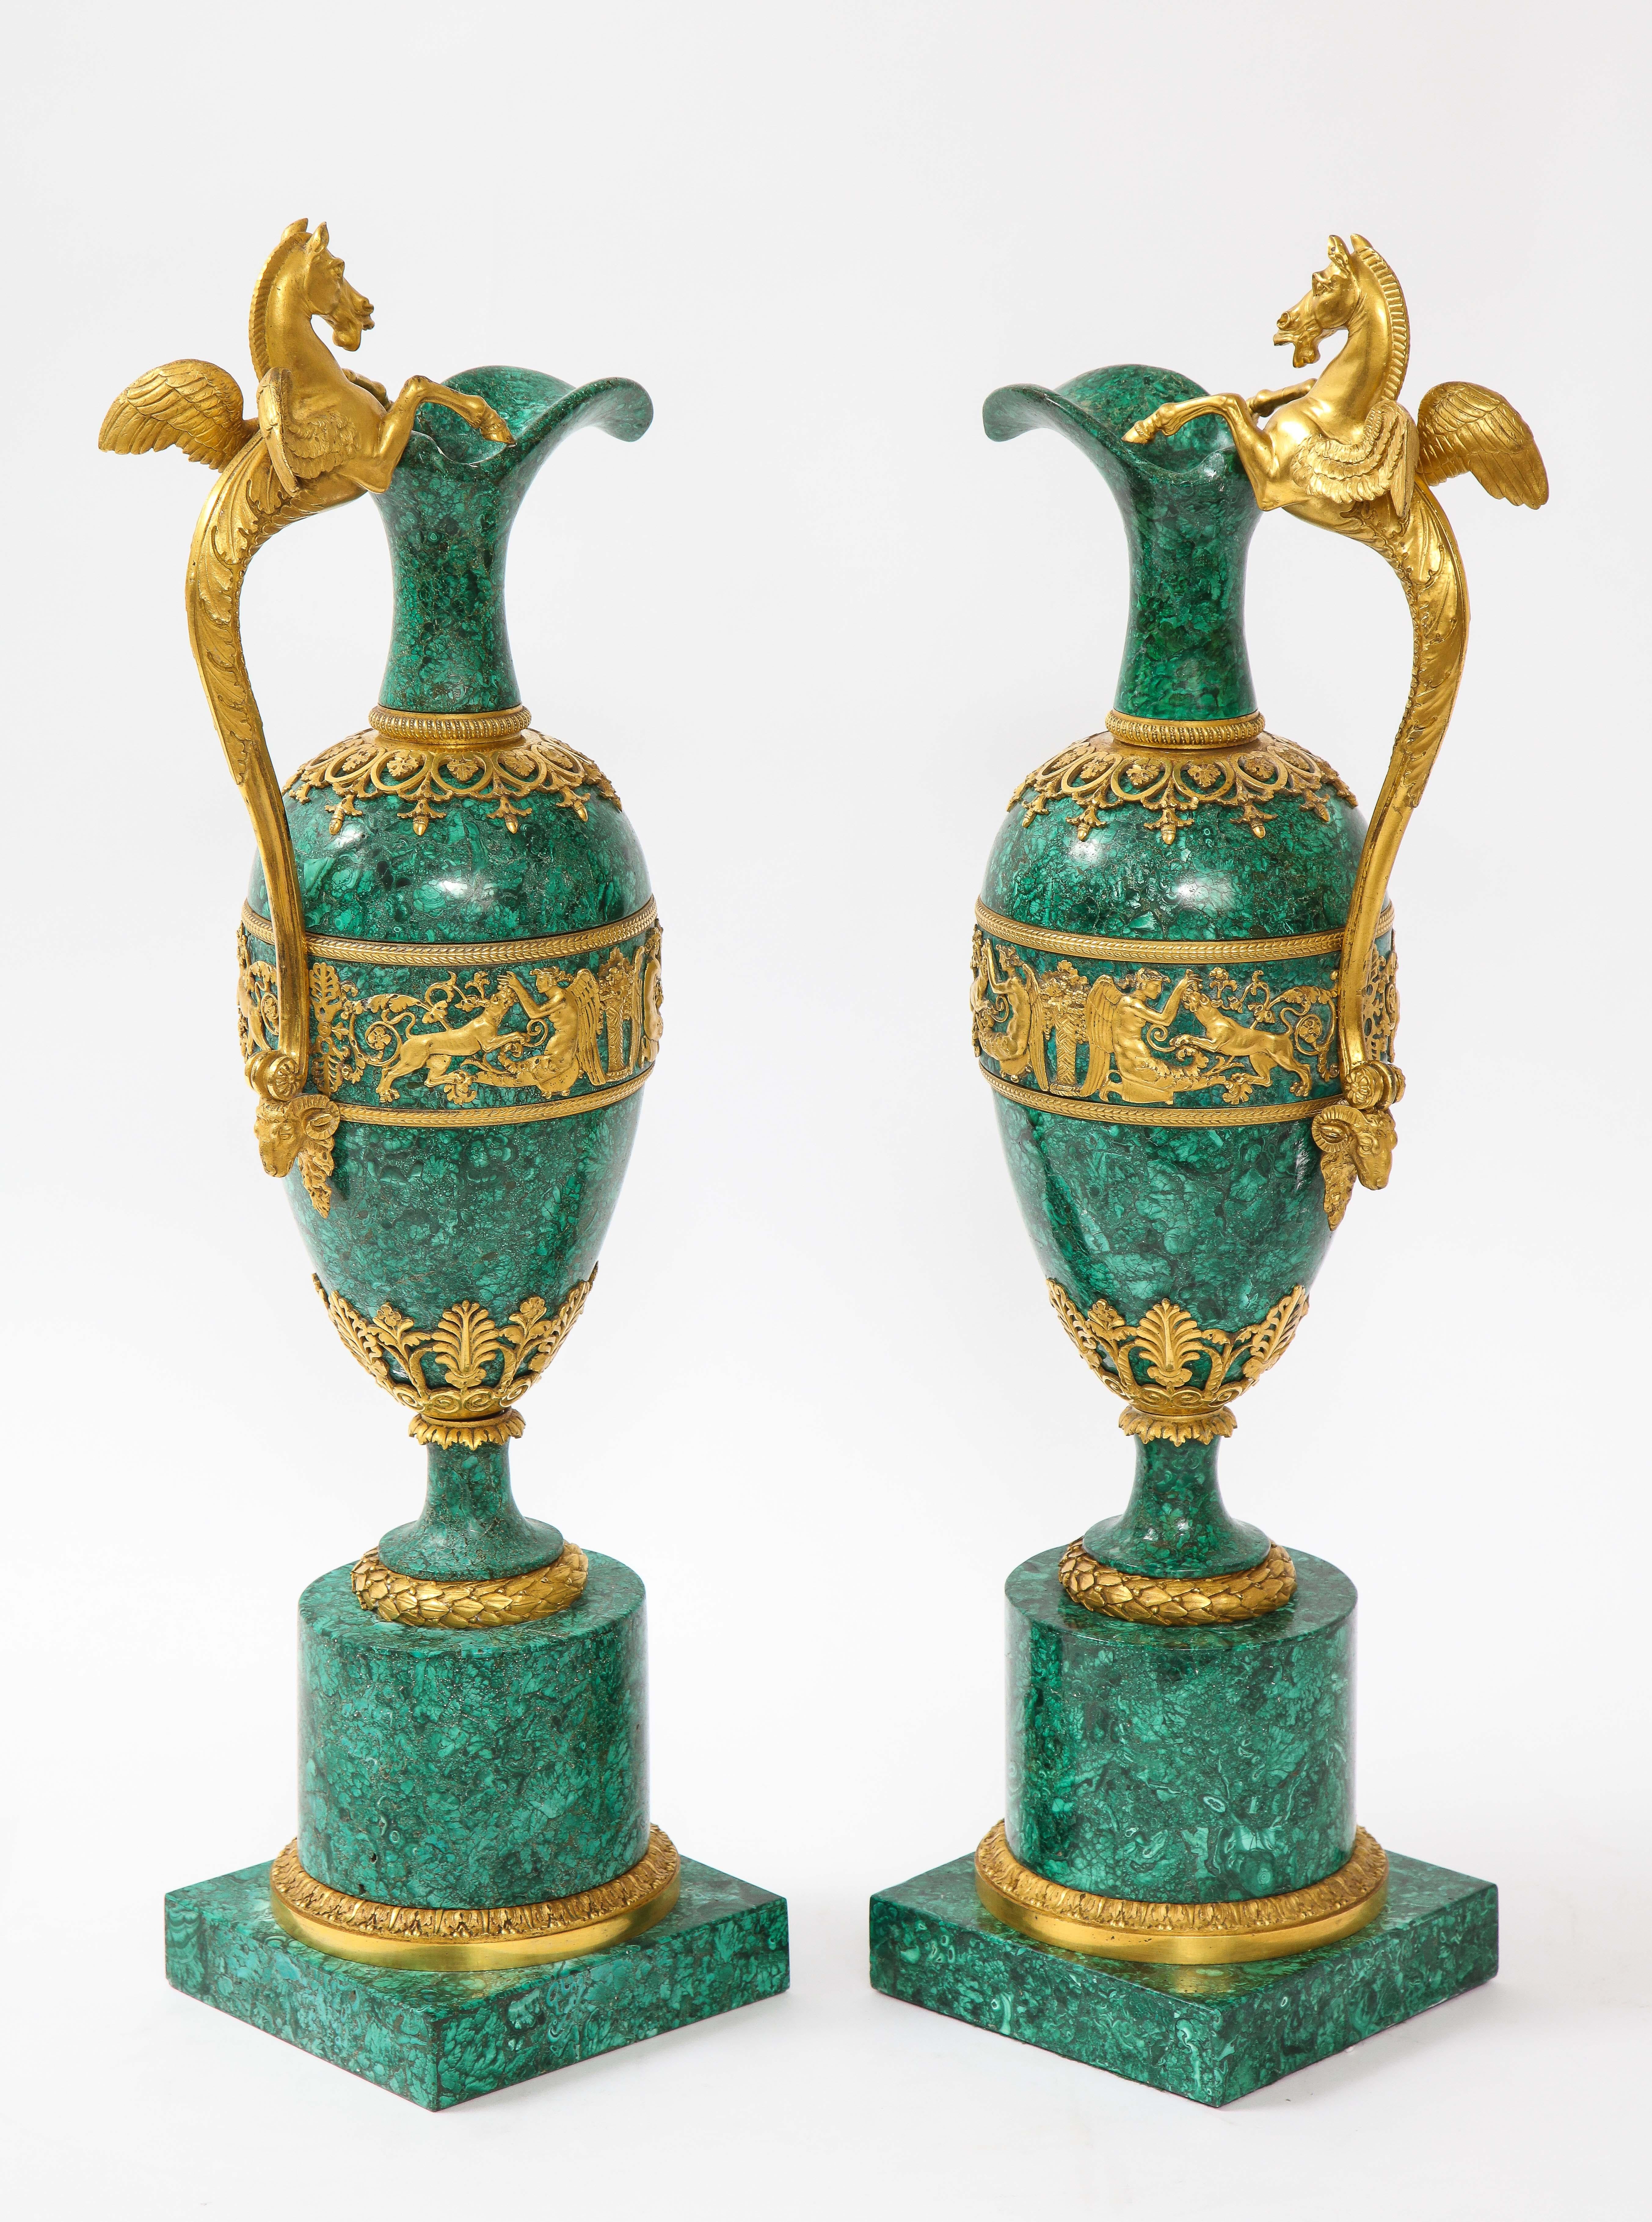 Bronze Empire Ormolu-Mounted Malachite Ewers Attributed to Claude Galle, Russian, Pair